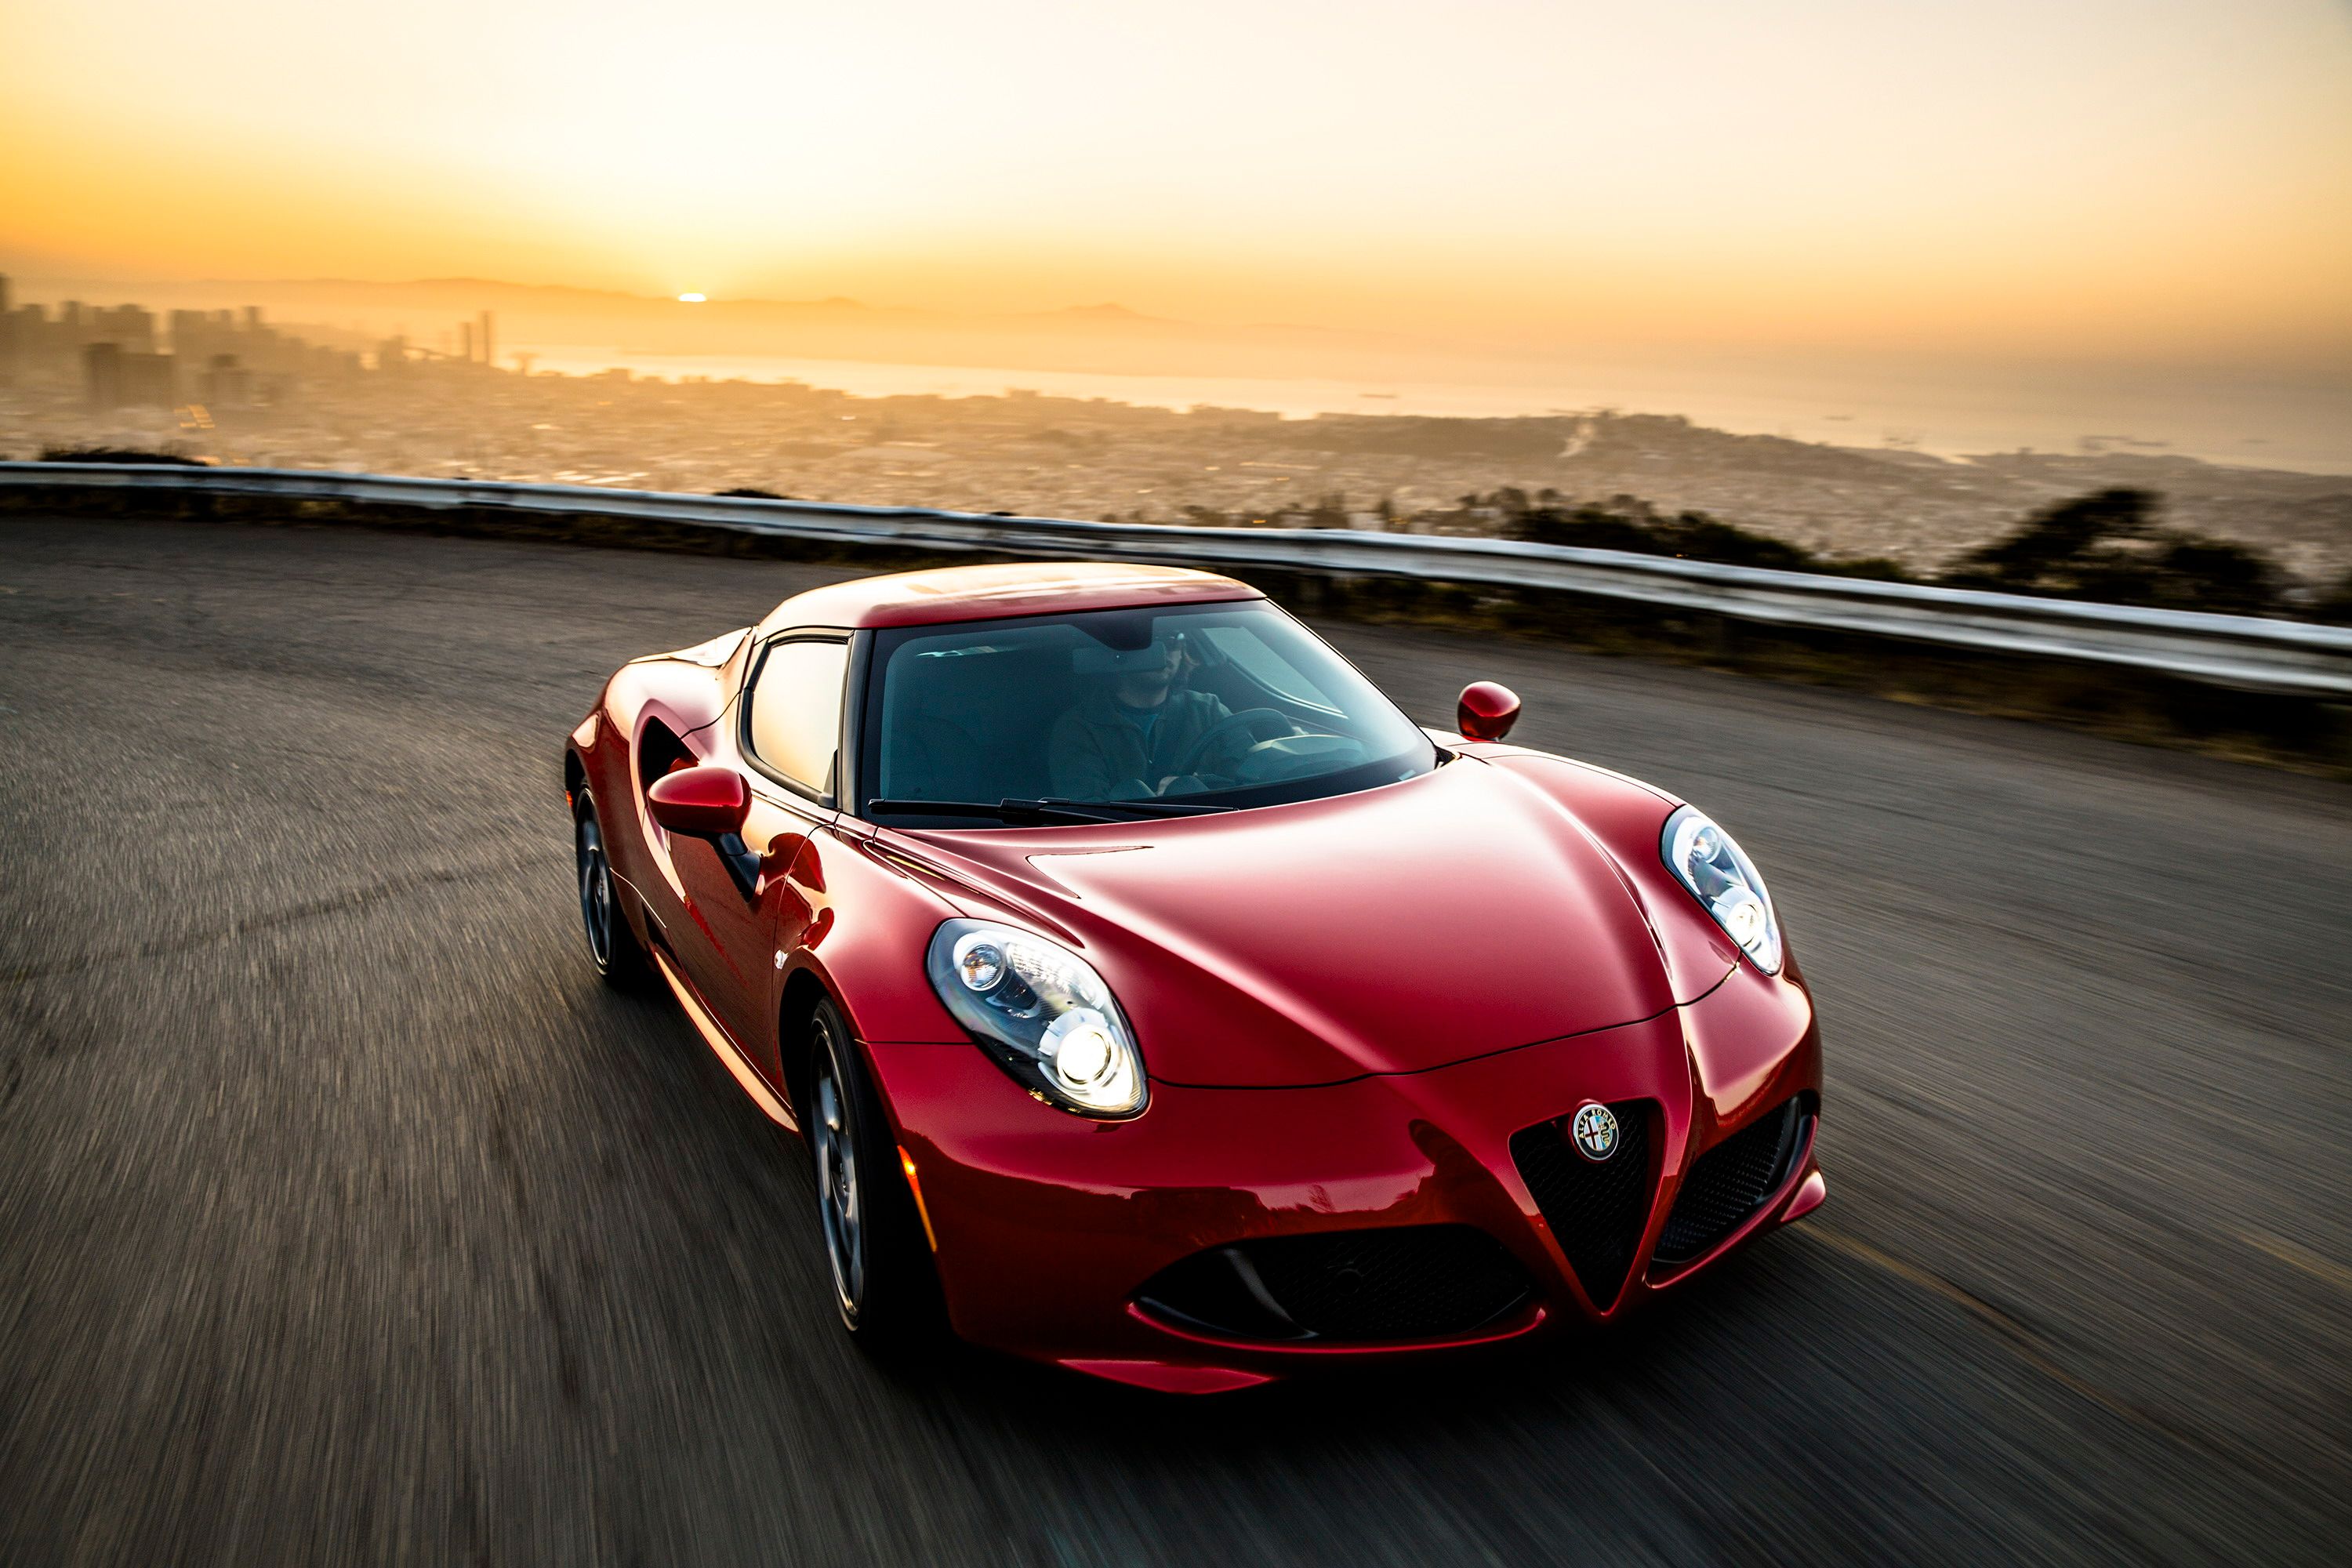 2019 As FCA Skins Alfa Romeo to the Bones, The 4C Is the First to be Discontinued 